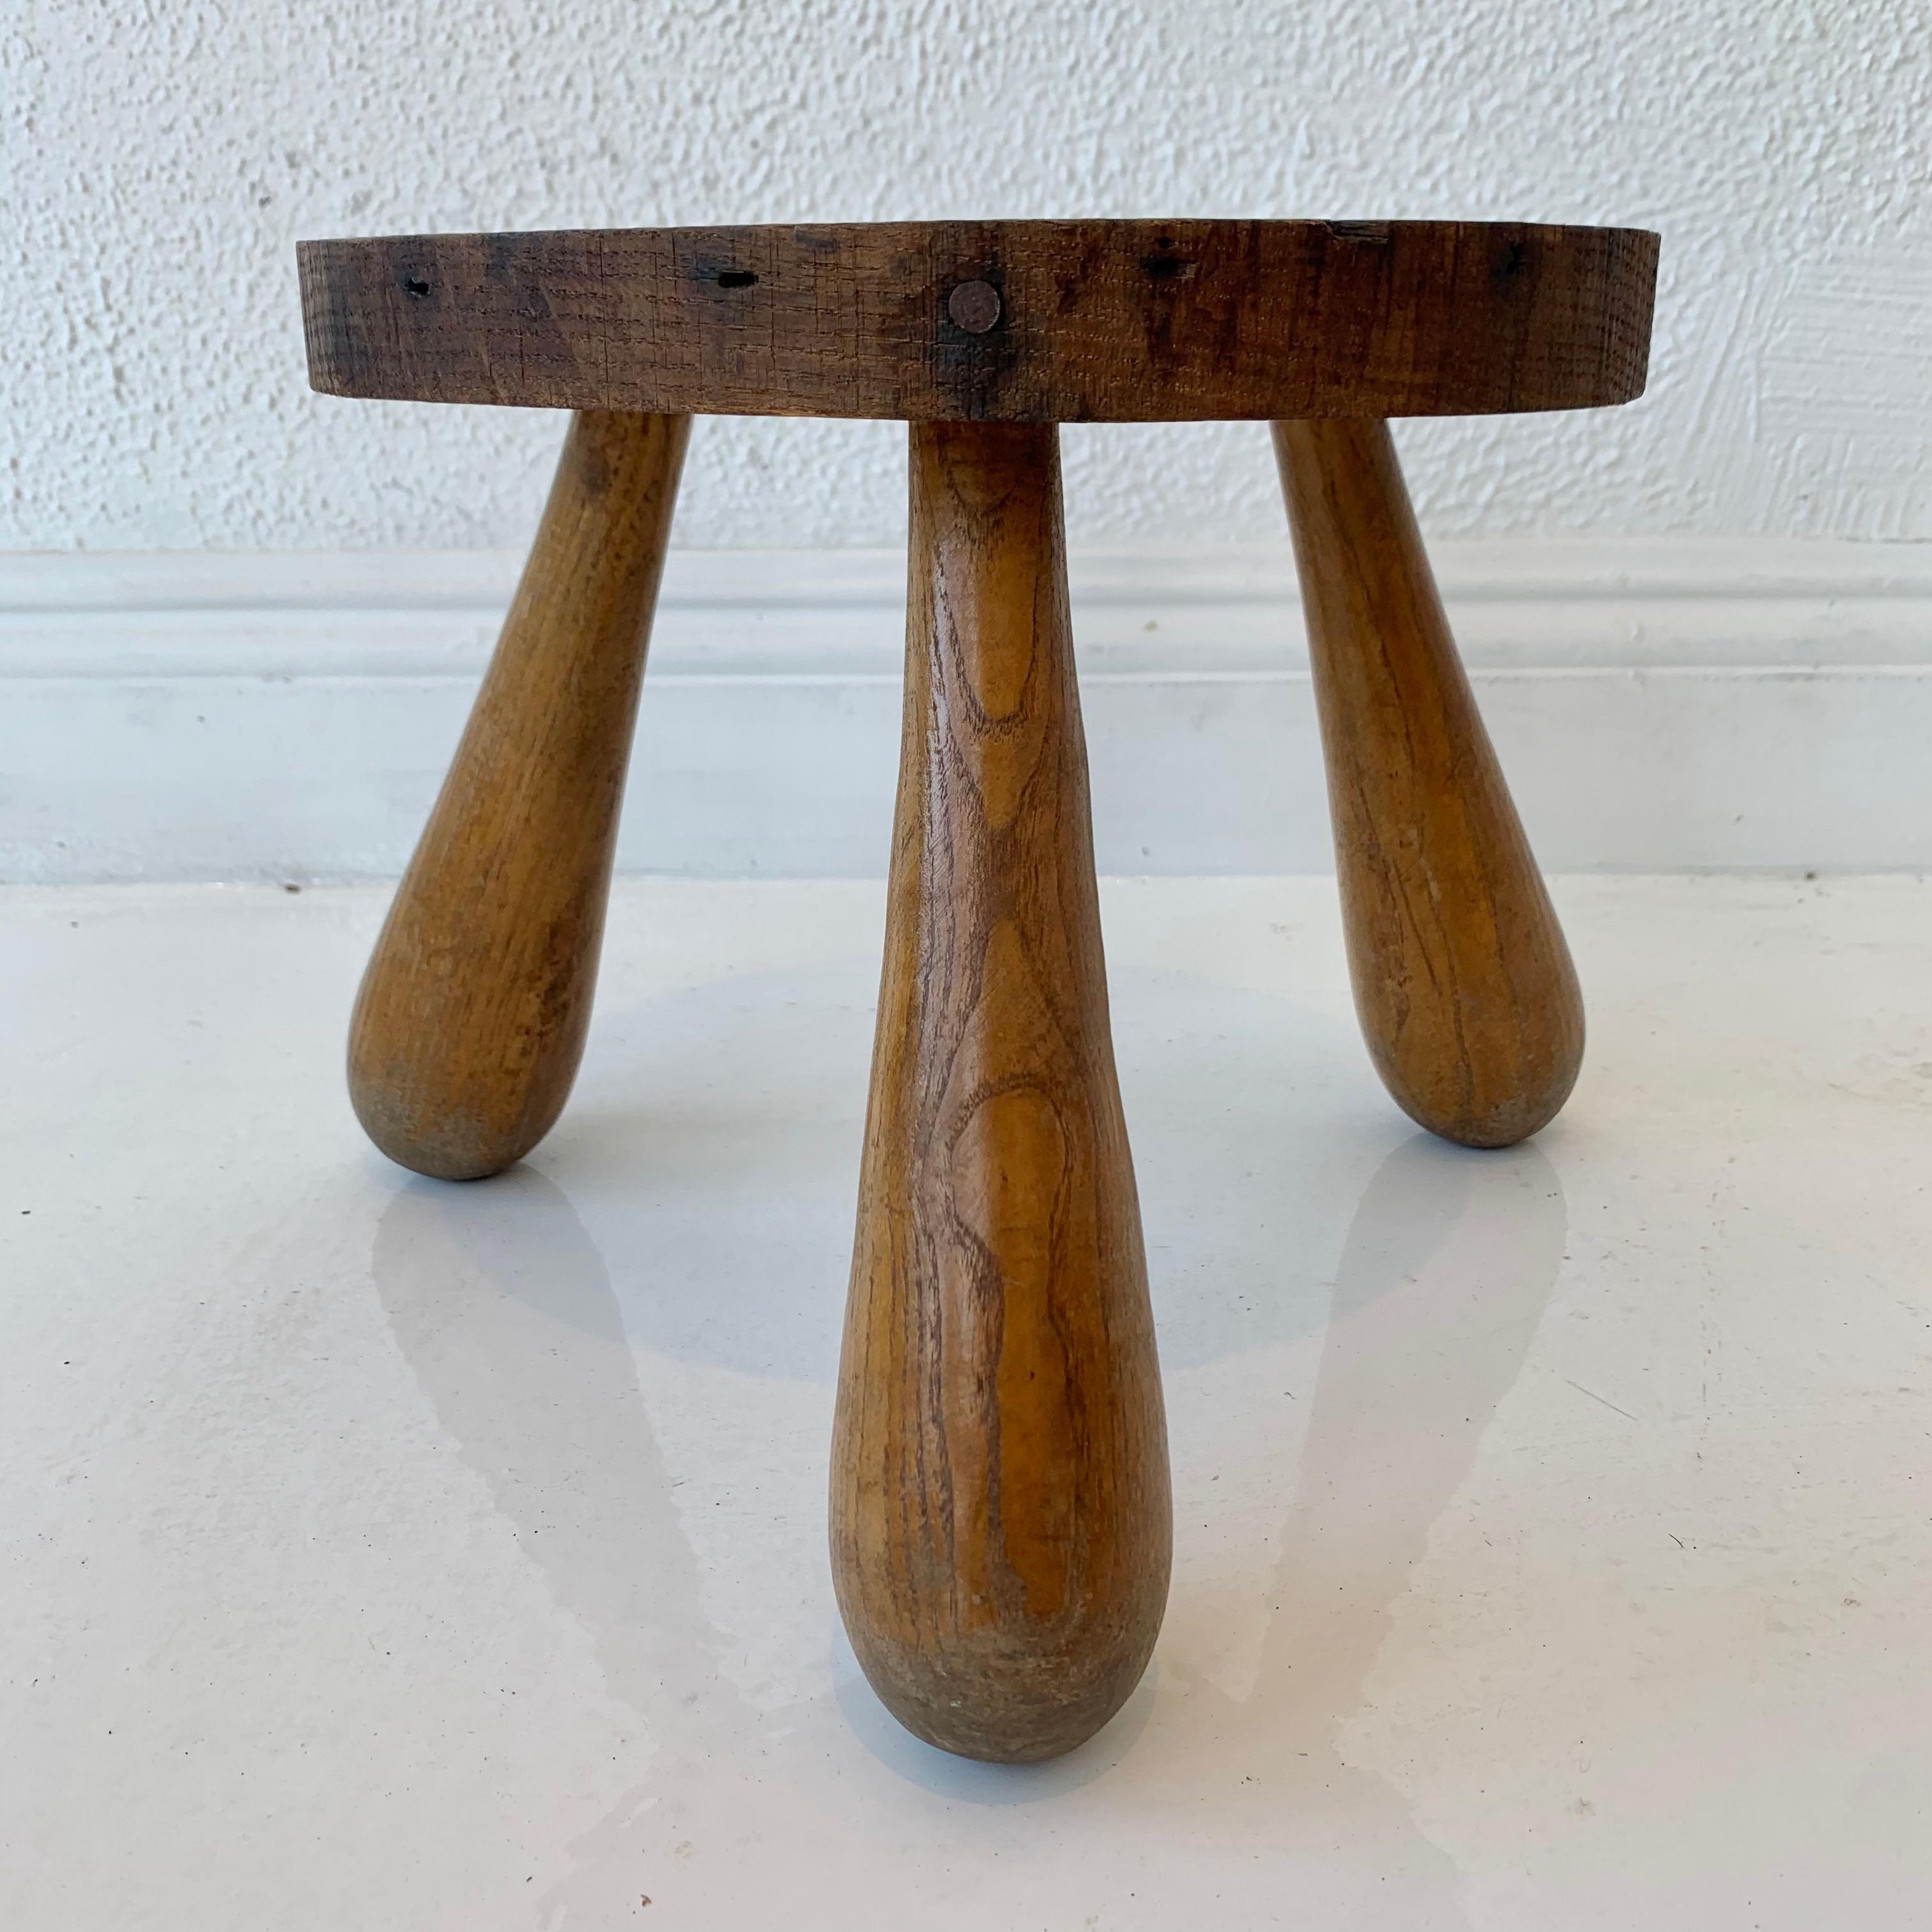 Perriand style stool made in France, circa 1950s. Thick oak legs with circular wood seat. No nails or hardware. Great lines and shape. Petite stool with great presence. Great vintage condition.


 